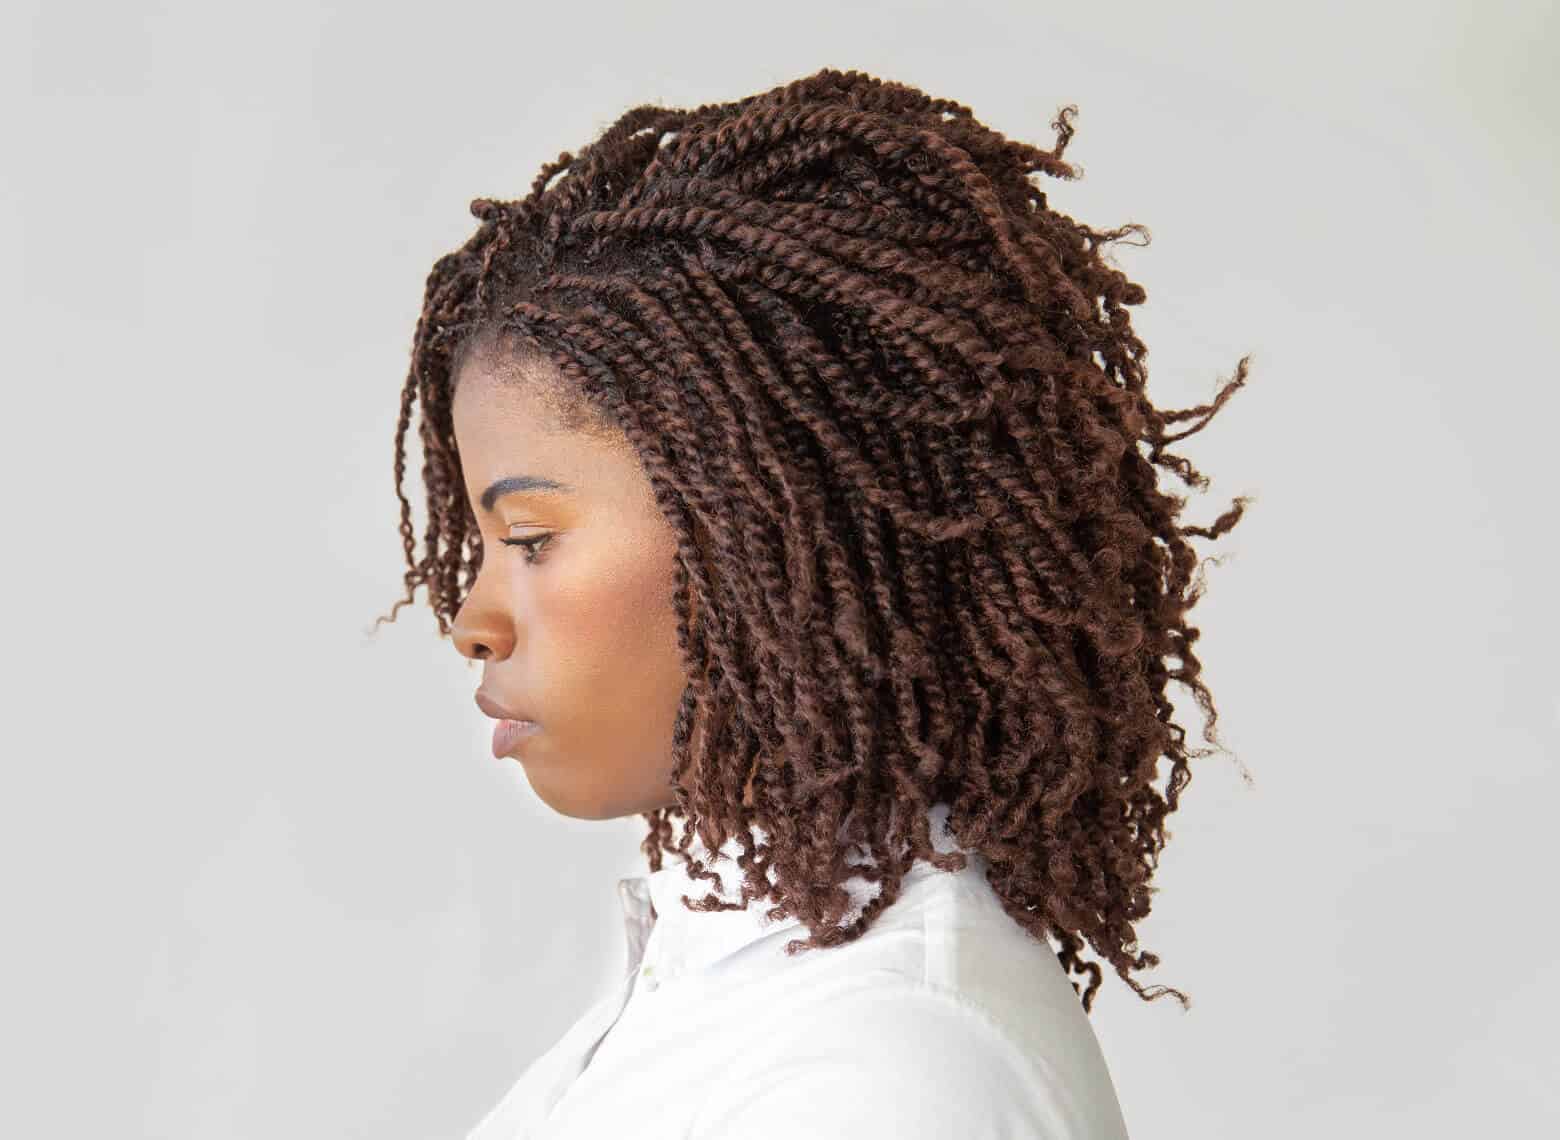 profile of person with brown shoulder-length nubian twists, looking down, and wearing a white button-up top